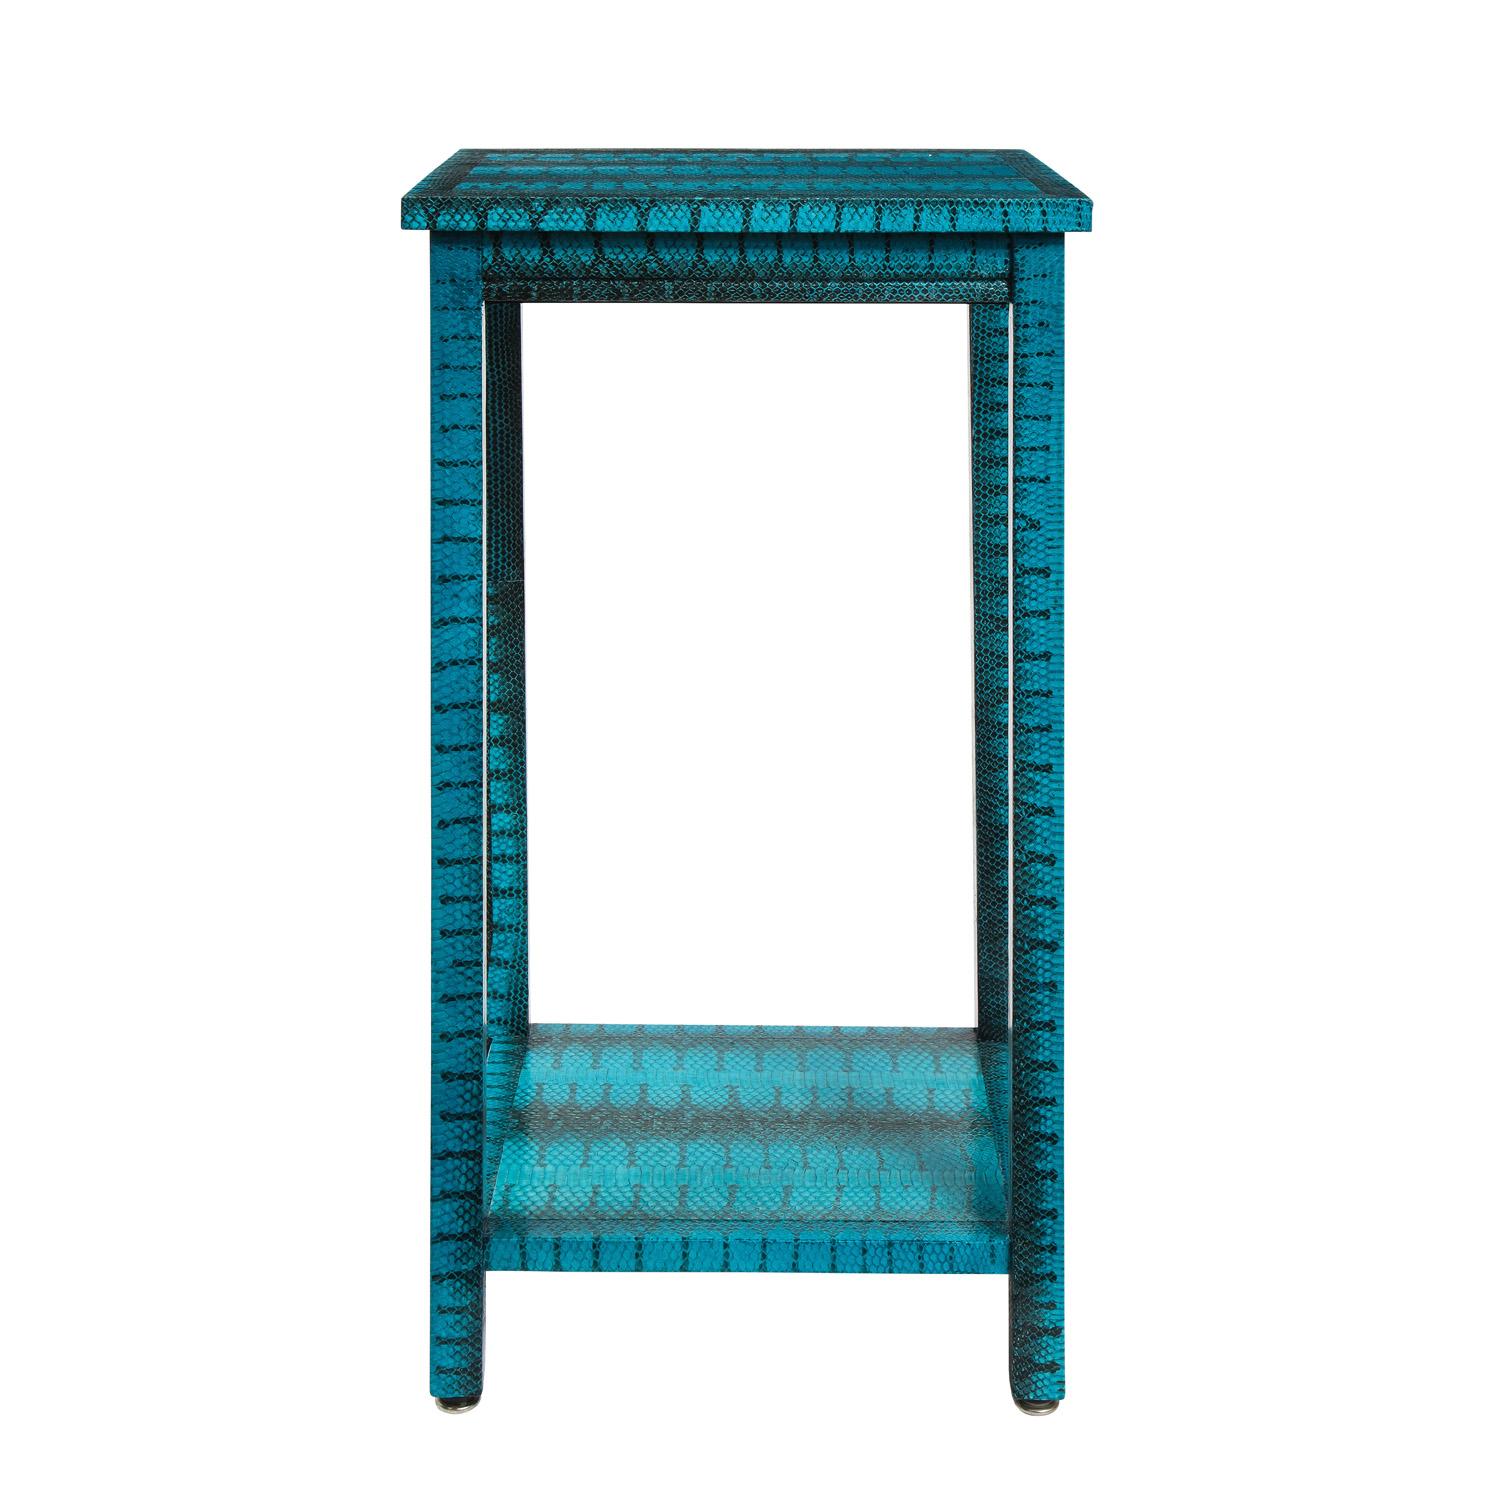 Tall 2-tier side table covered in exotic blue snake skin by Evan Lobel for Lobel Originals, American 2021. The color is exquisite and it is the perfect meticulously crafted table in any room.